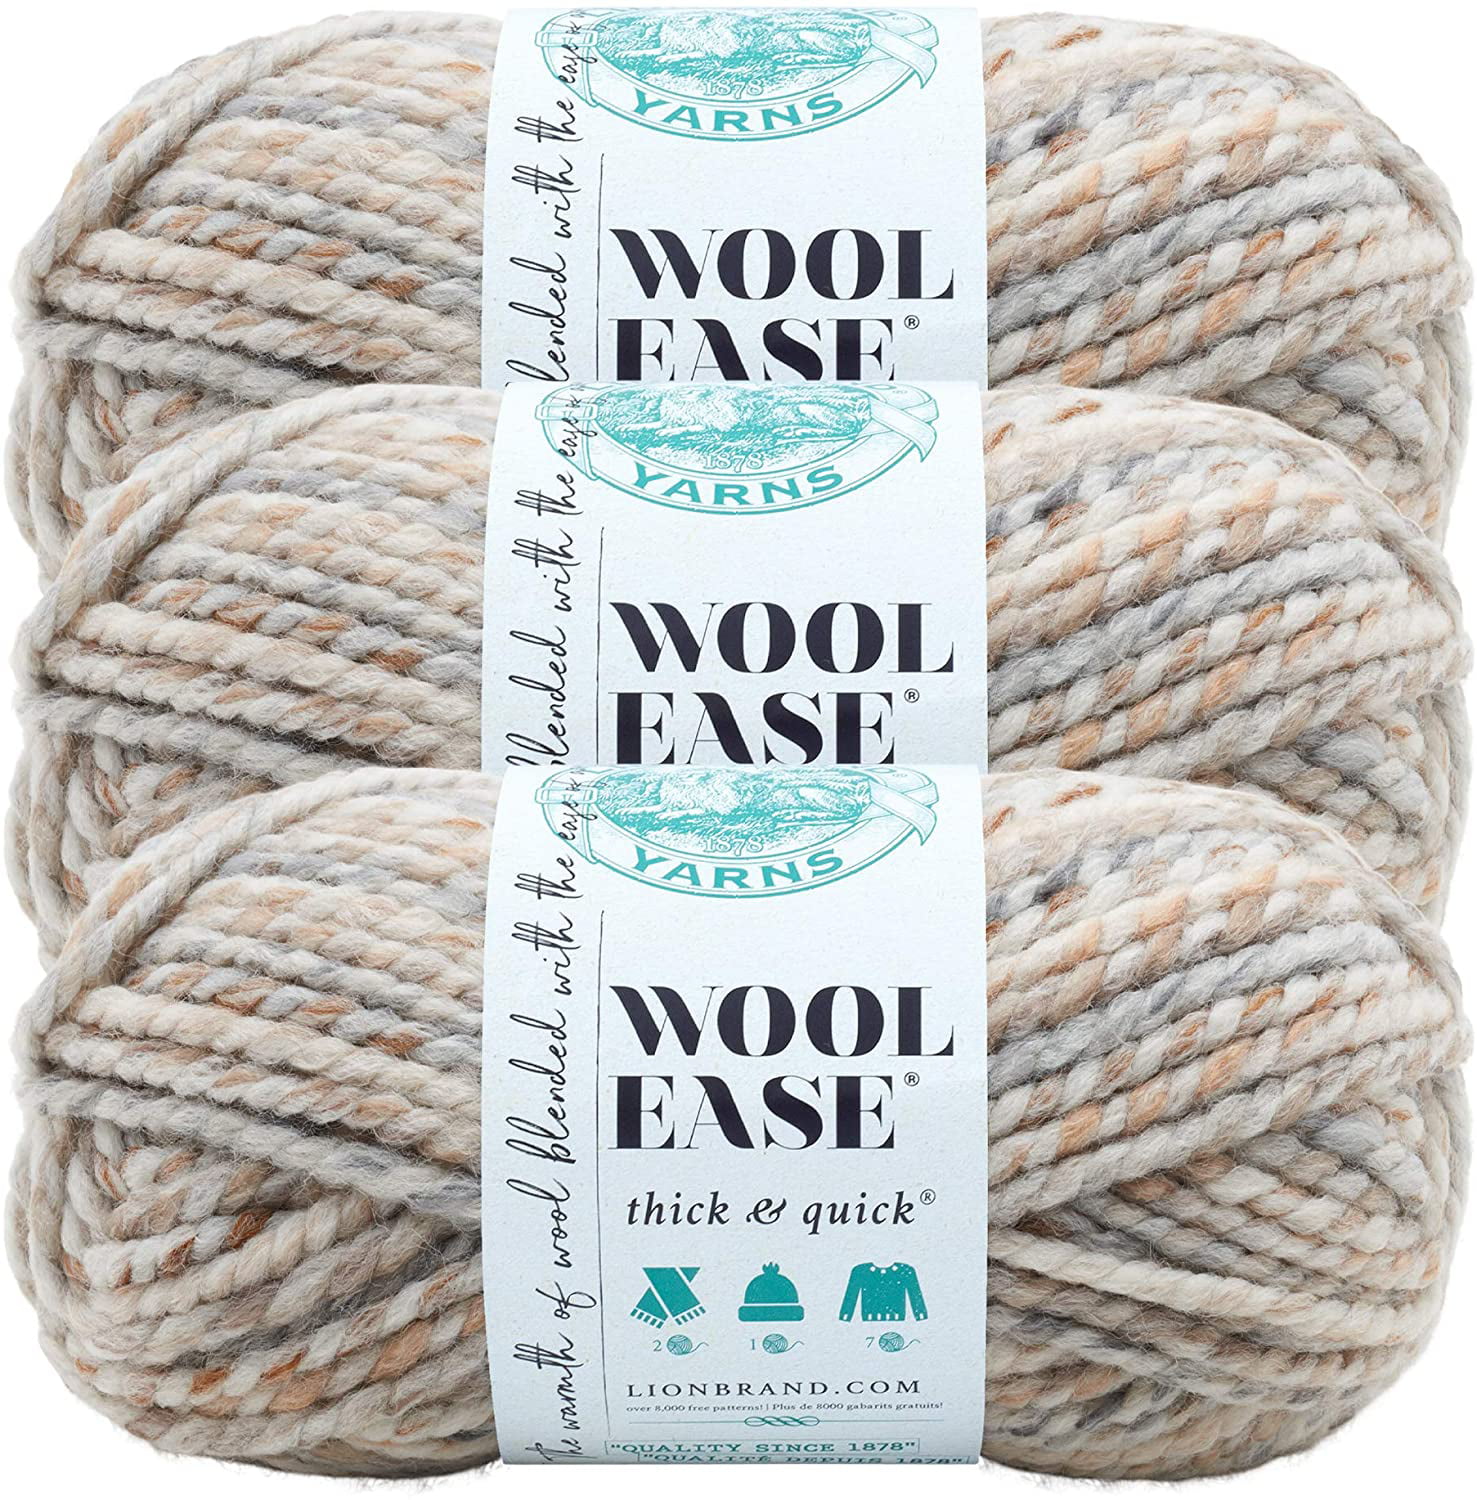 3 Pack) Lion Brand Yarn 640-536 Wool-Ease Thick and Quick Yarn 